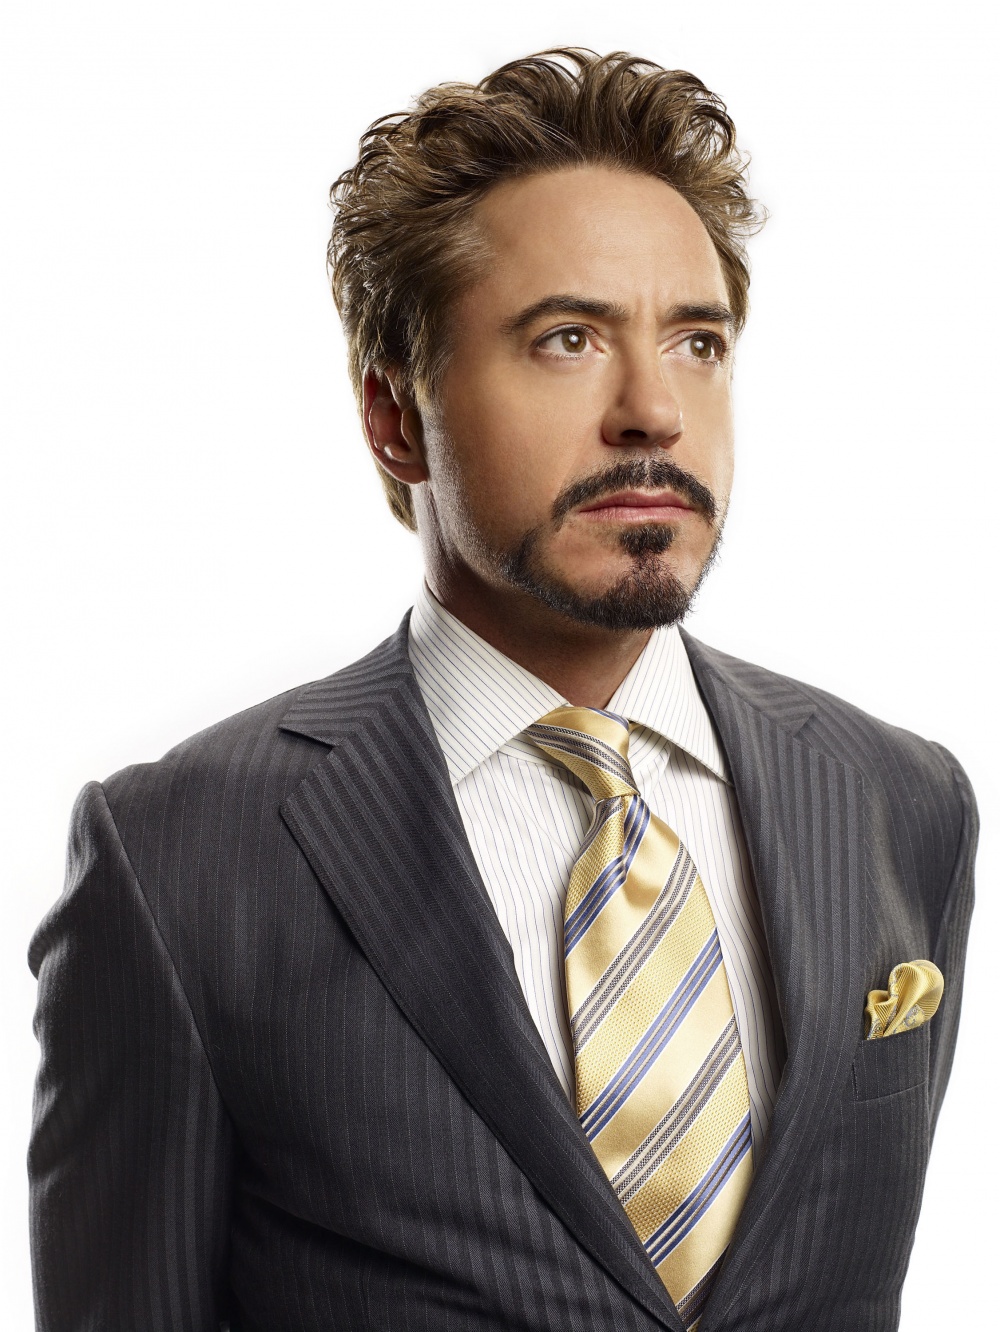 Robert Downey Jr - Who votes we bring this hairstyle back? | Facebook